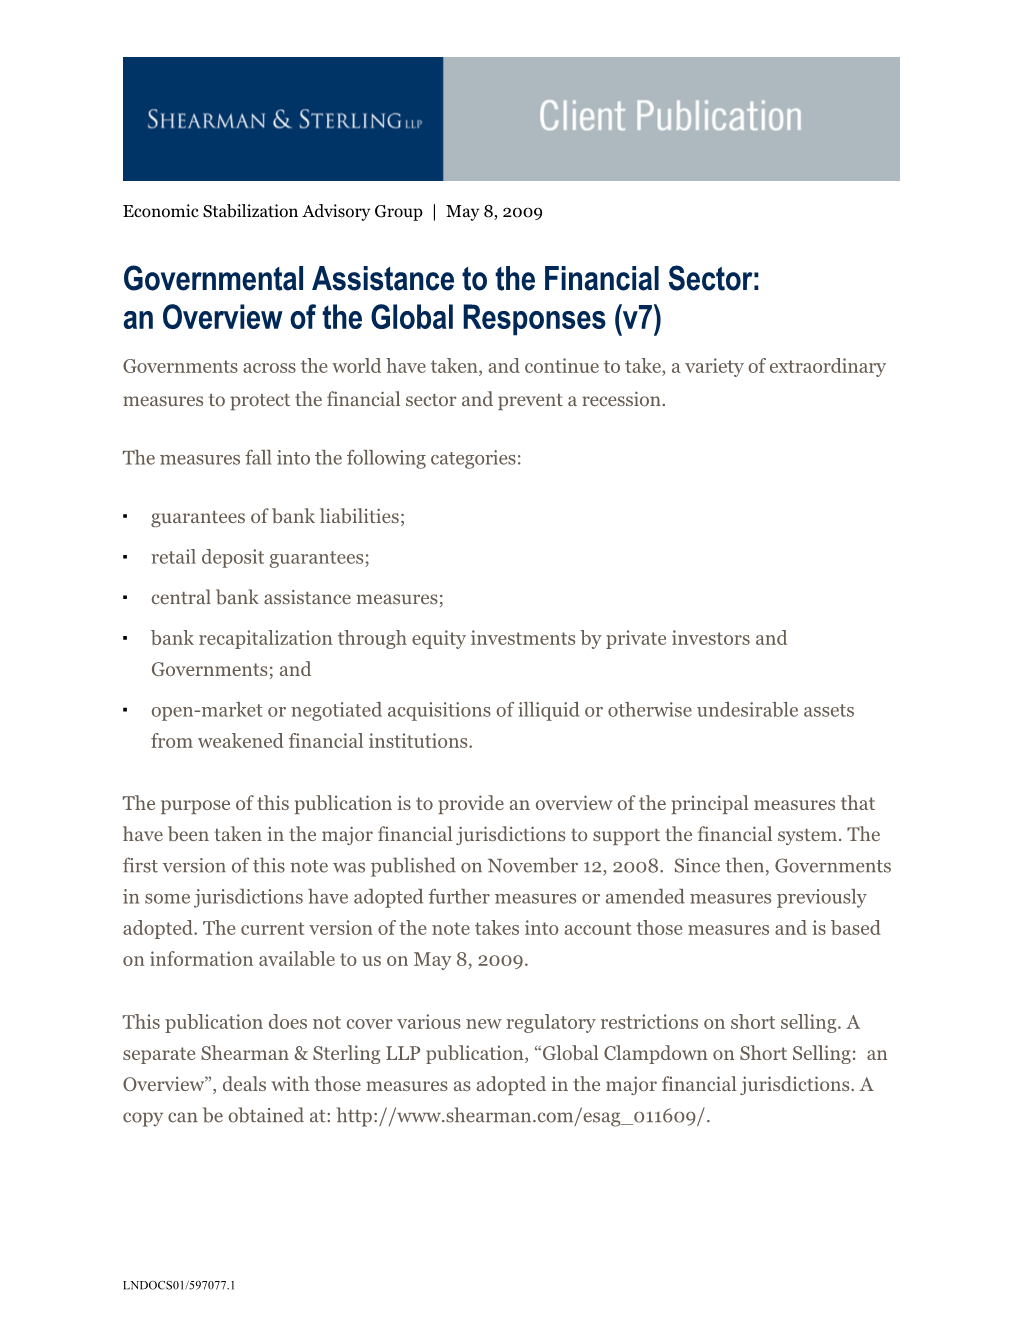 Governmental Assistance to the Financial Sector: an Overview of the Global Responses (V7)